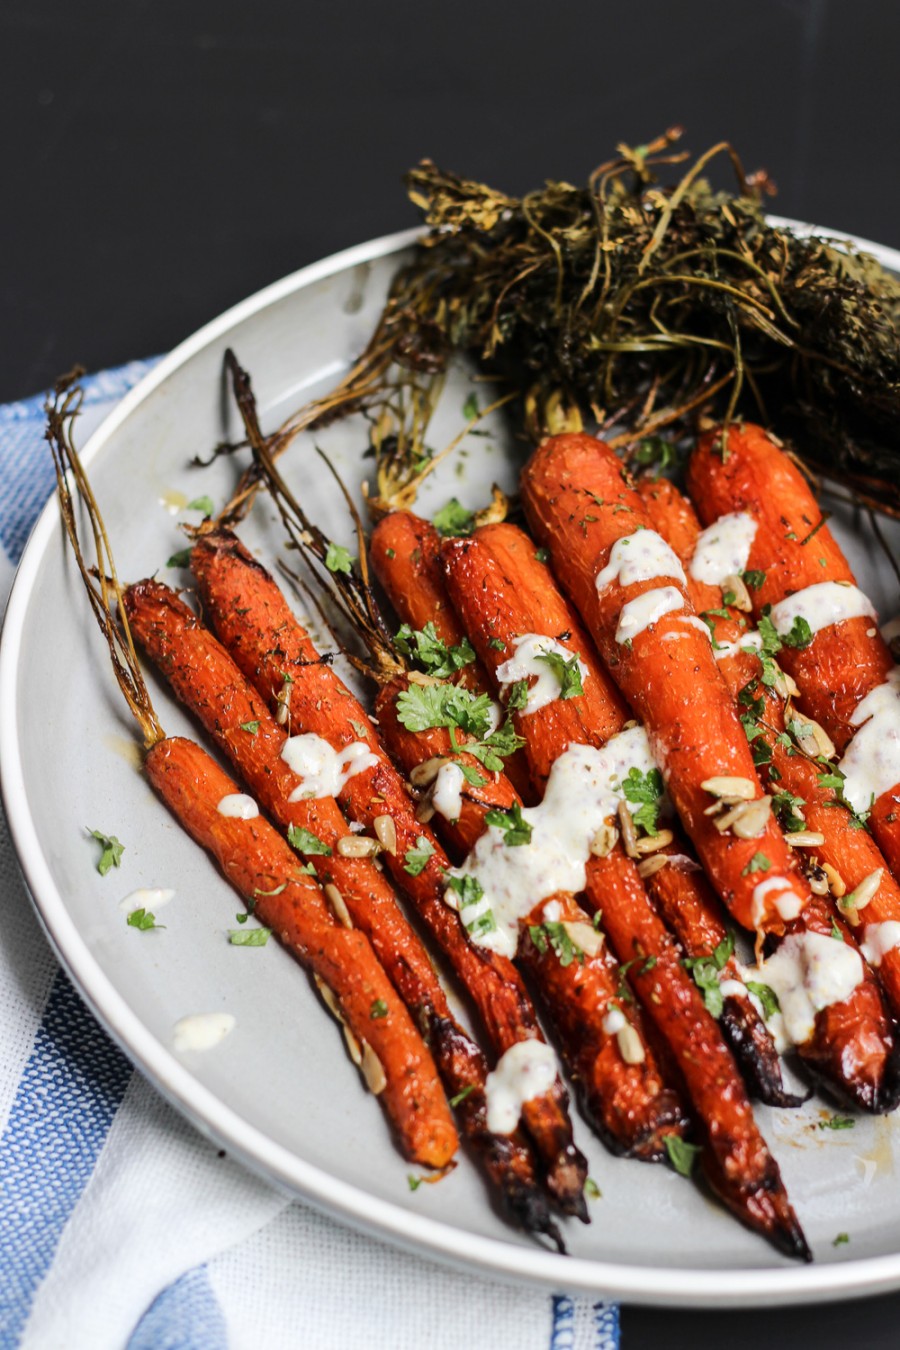 Sweet and salty roast carrots – simple sides